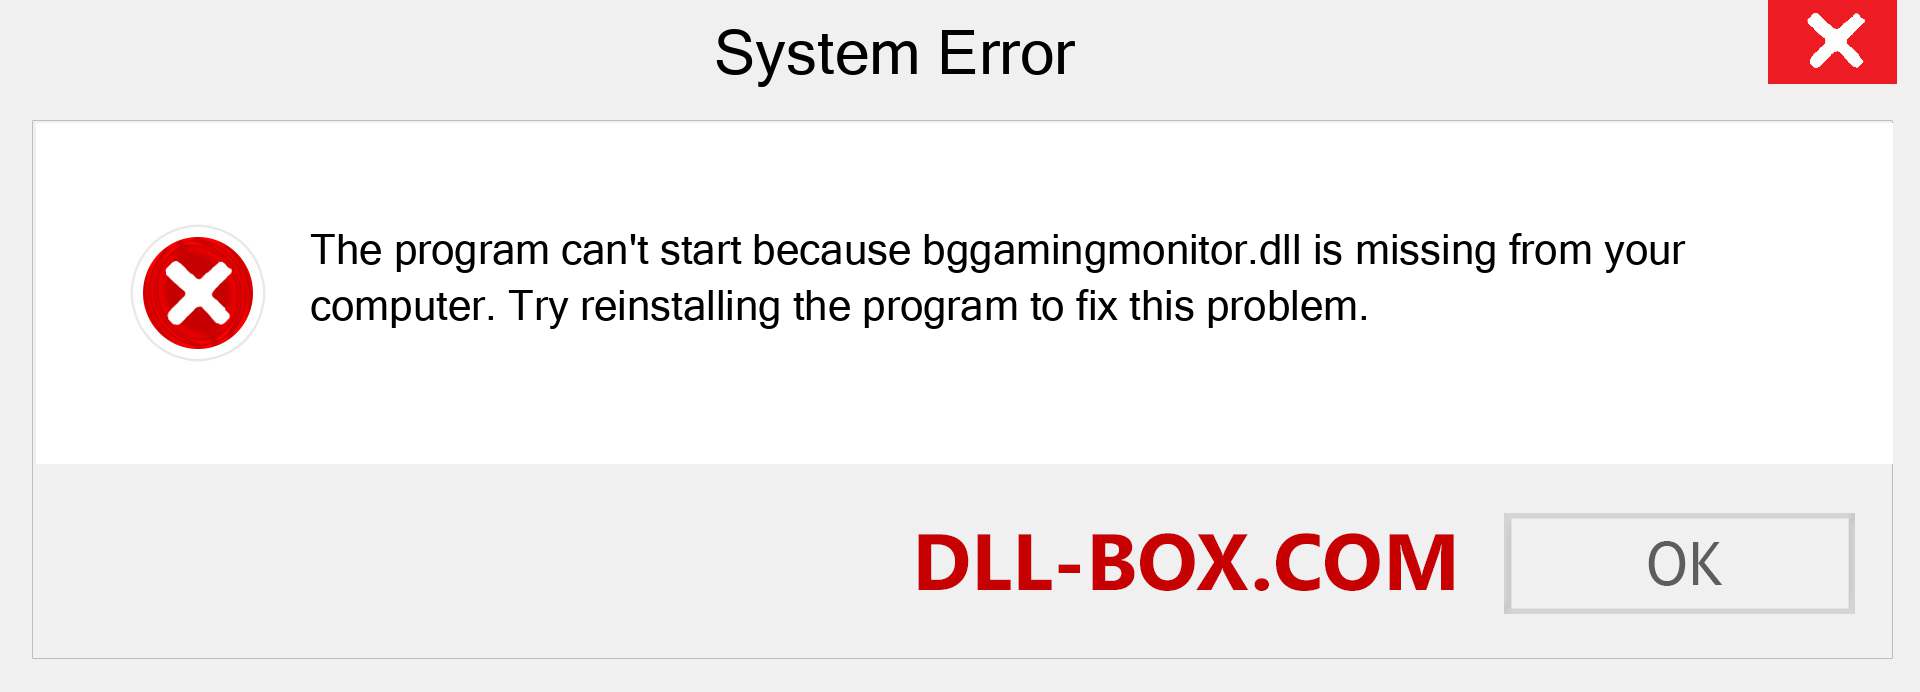  bggamingmonitor.dll file is missing?. Download for Windows 7, 8, 10 - Fix  bggamingmonitor dll Missing Error on Windows, photos, images